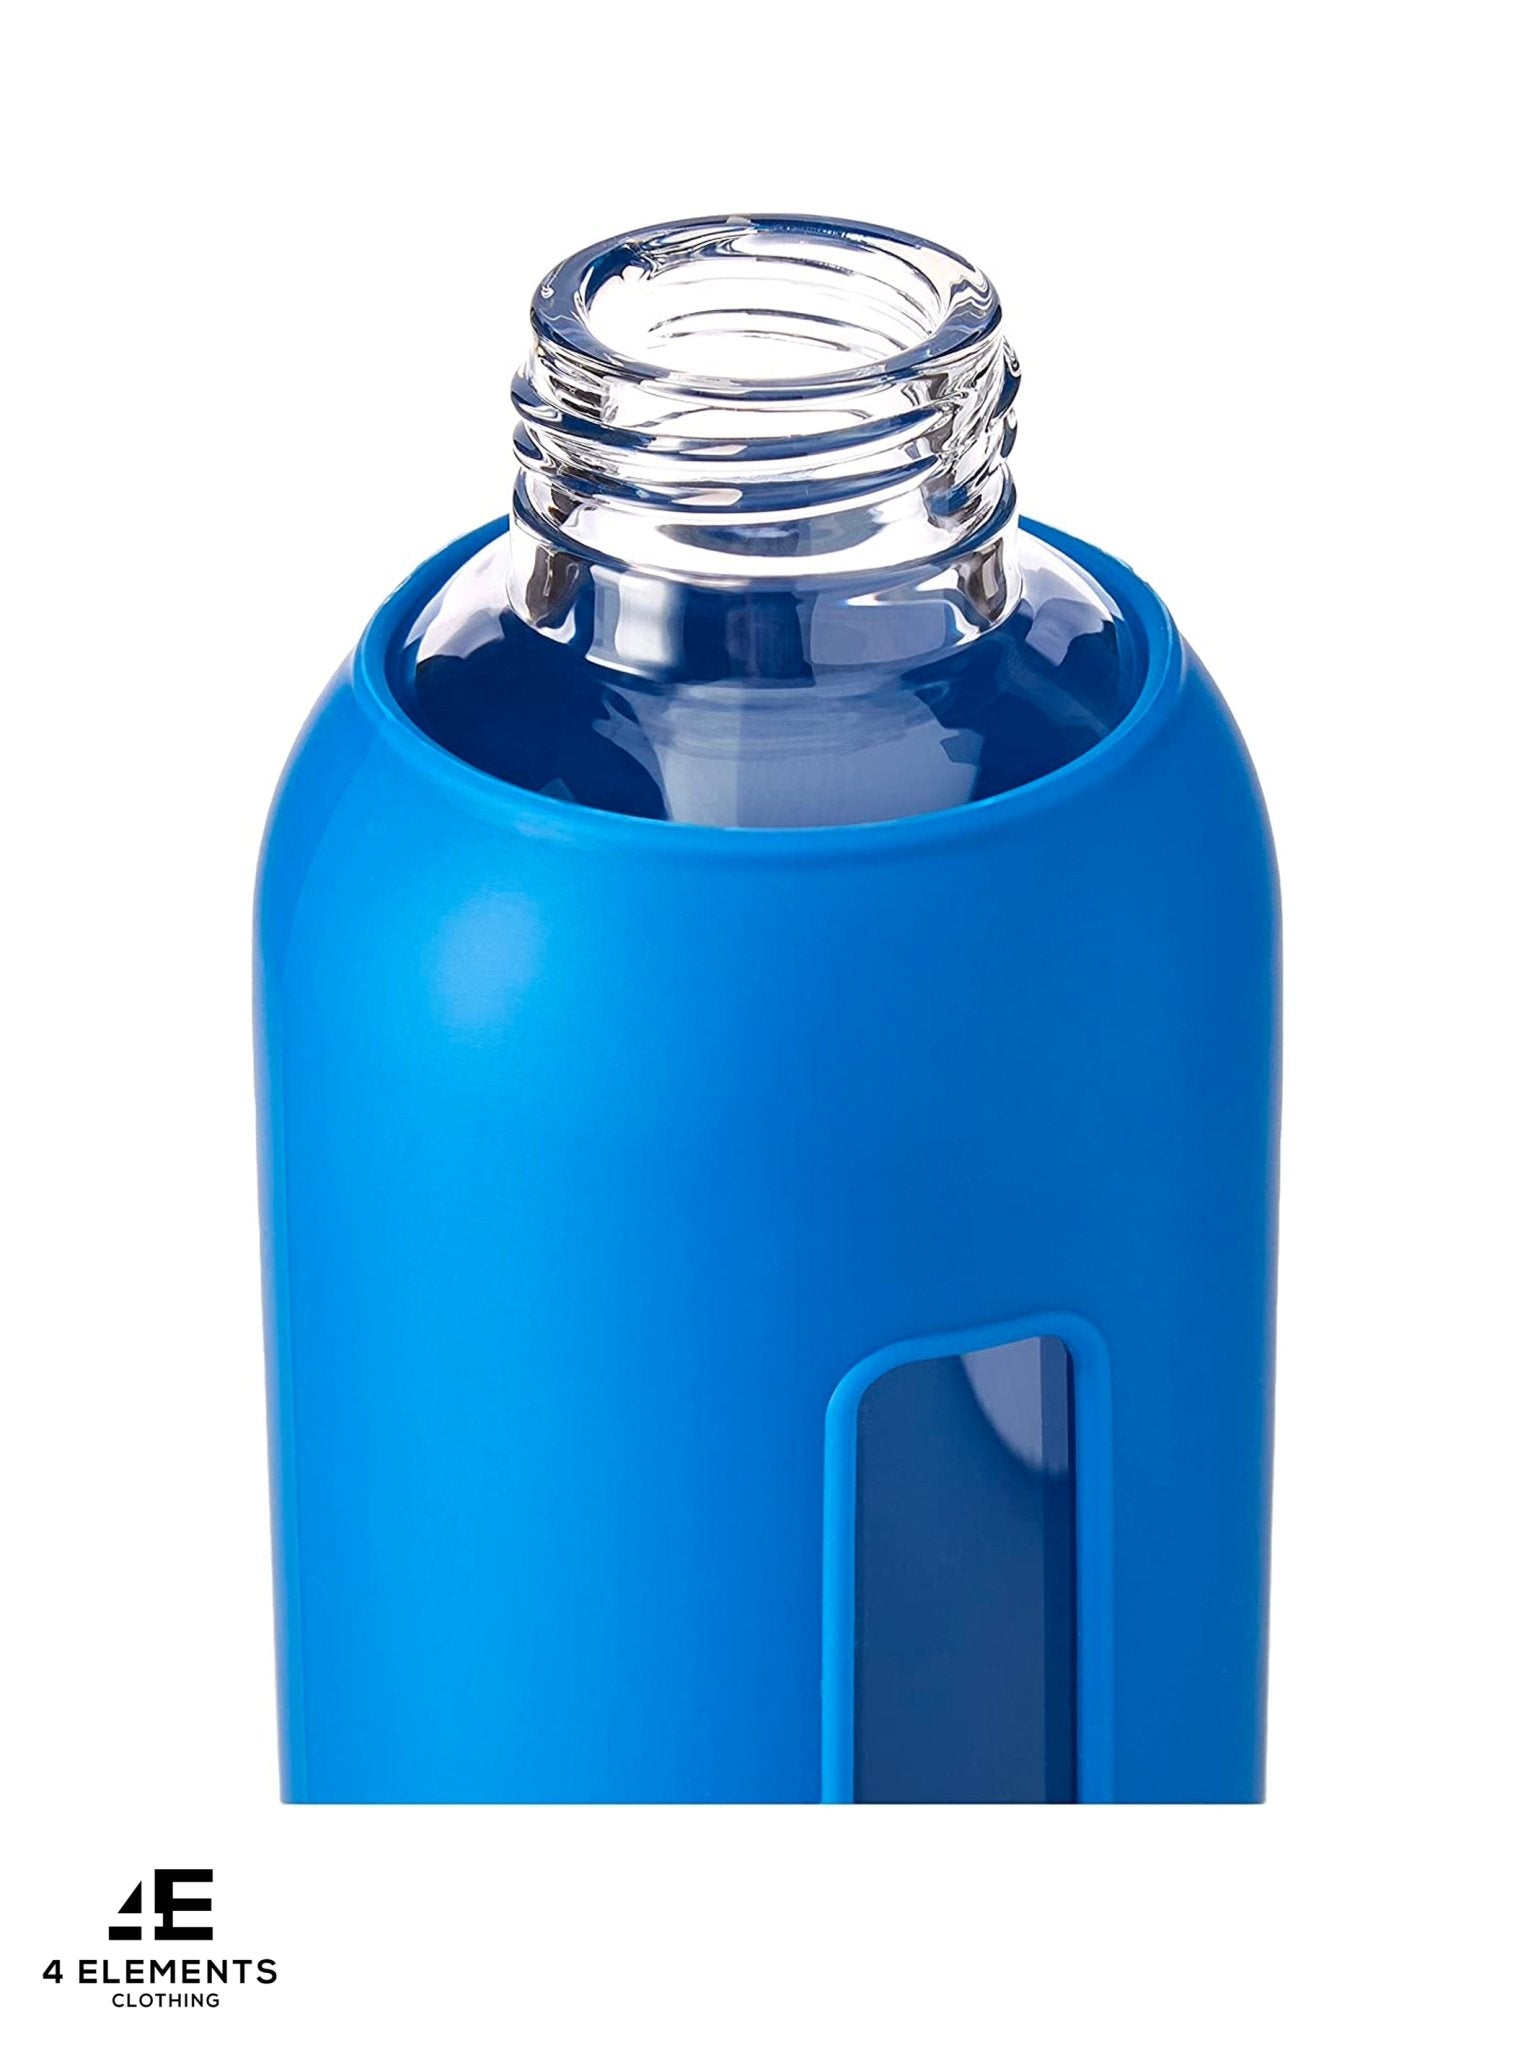 4elementsclothingSiggSIGG - Star Water Bottle, Leak-Proof Glass Bottle, Heat-Resistant with Silicone CaseWater Bottles8649.20